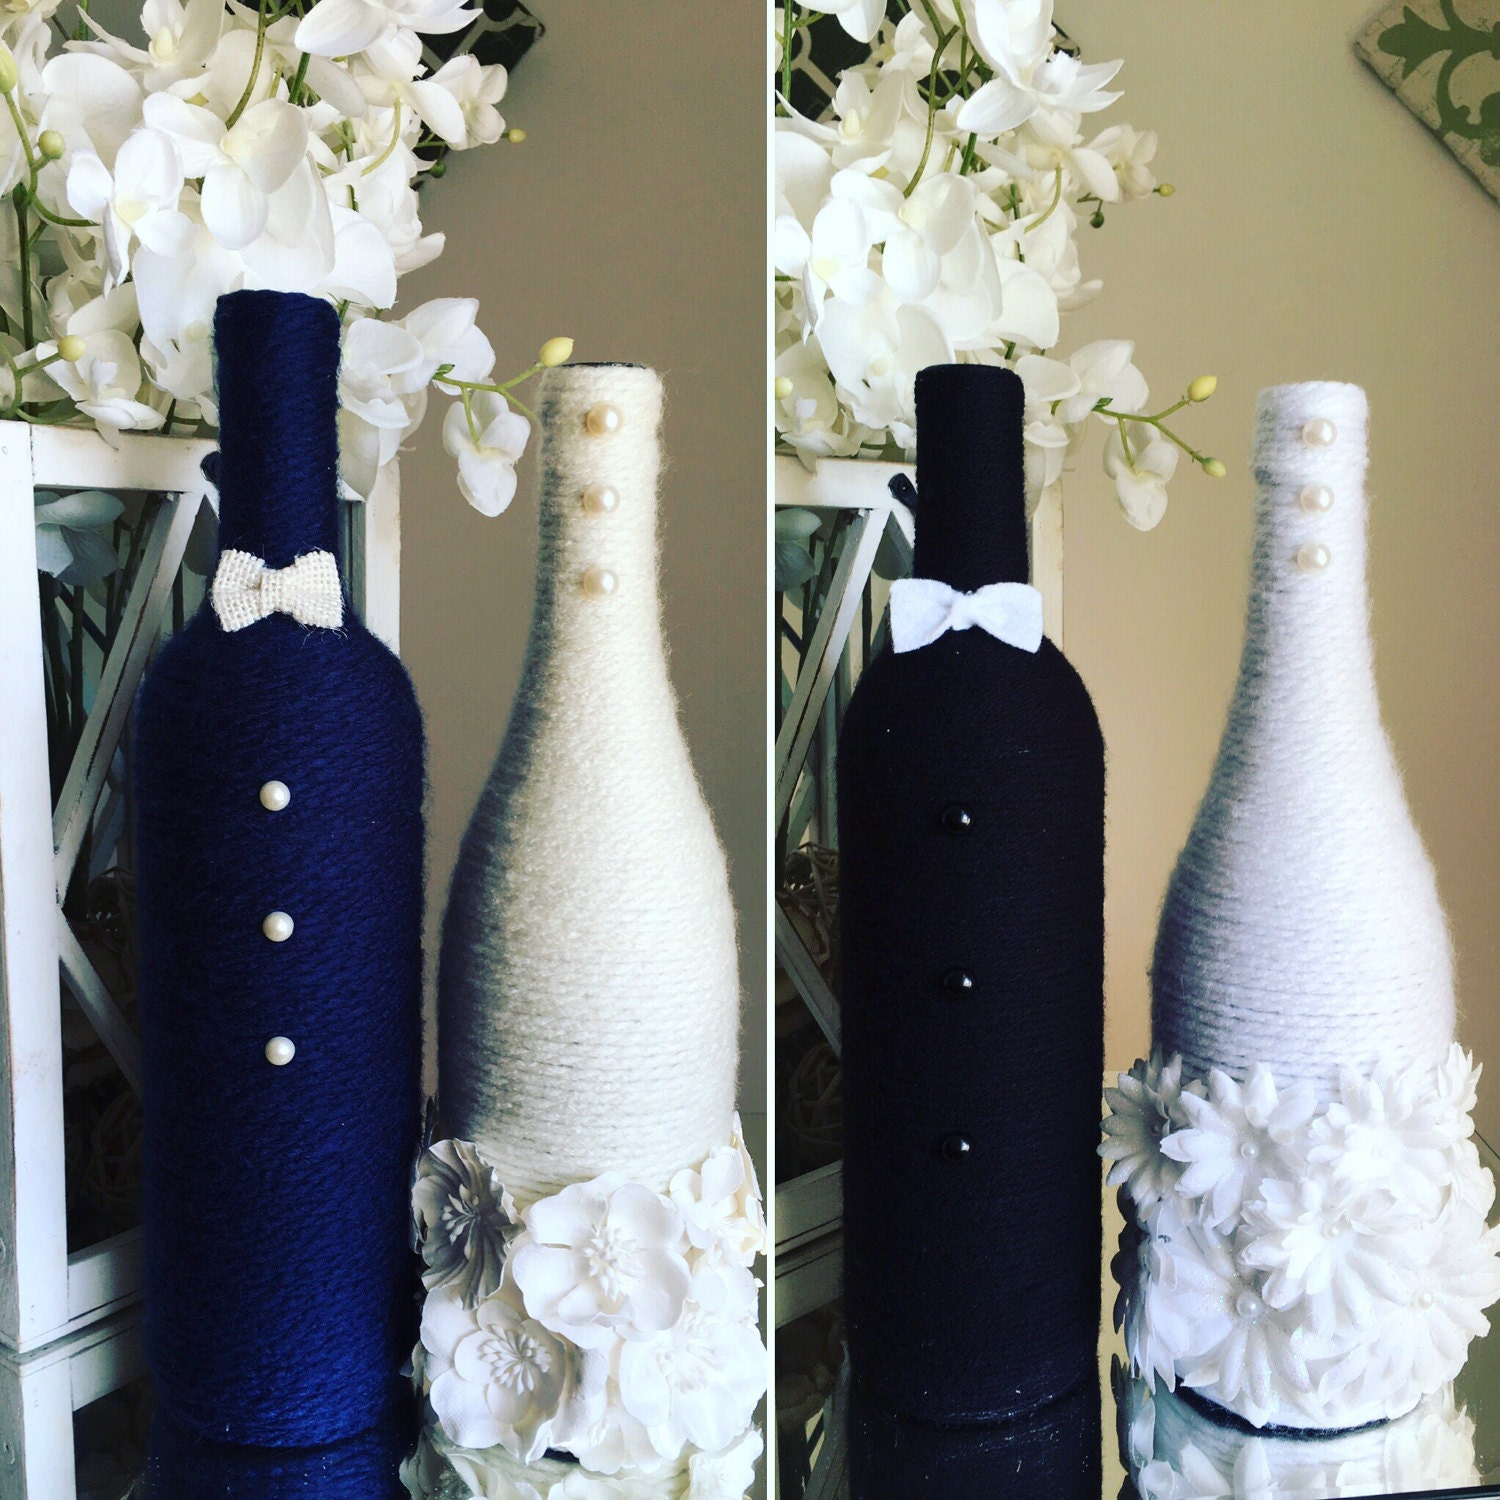 Set of Bride and Groom Wine Bottle Covers Wedding Favors Decorations 